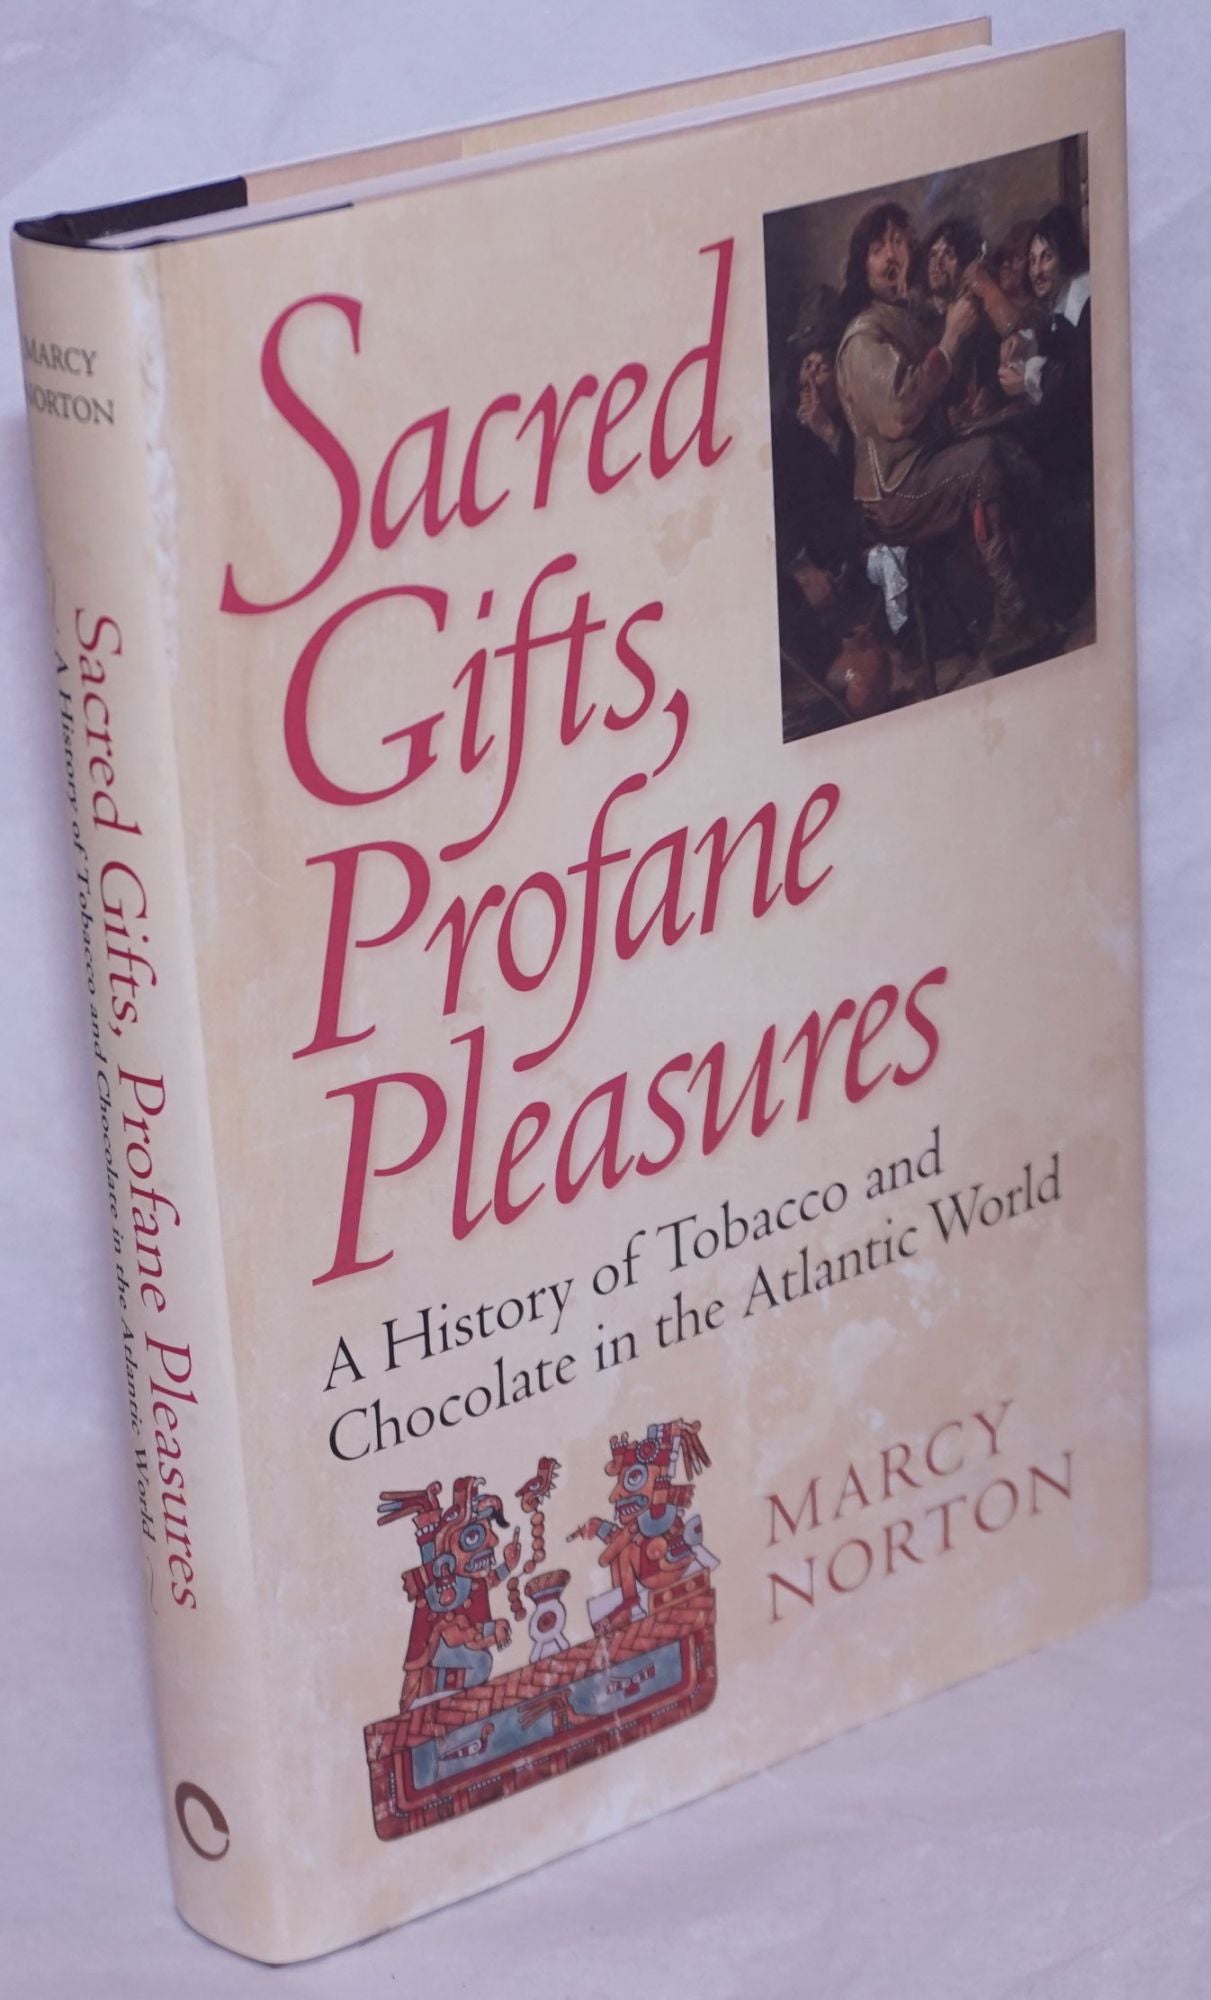 Sacred Gifts, Profane Pleasures, a History of Tobacco and